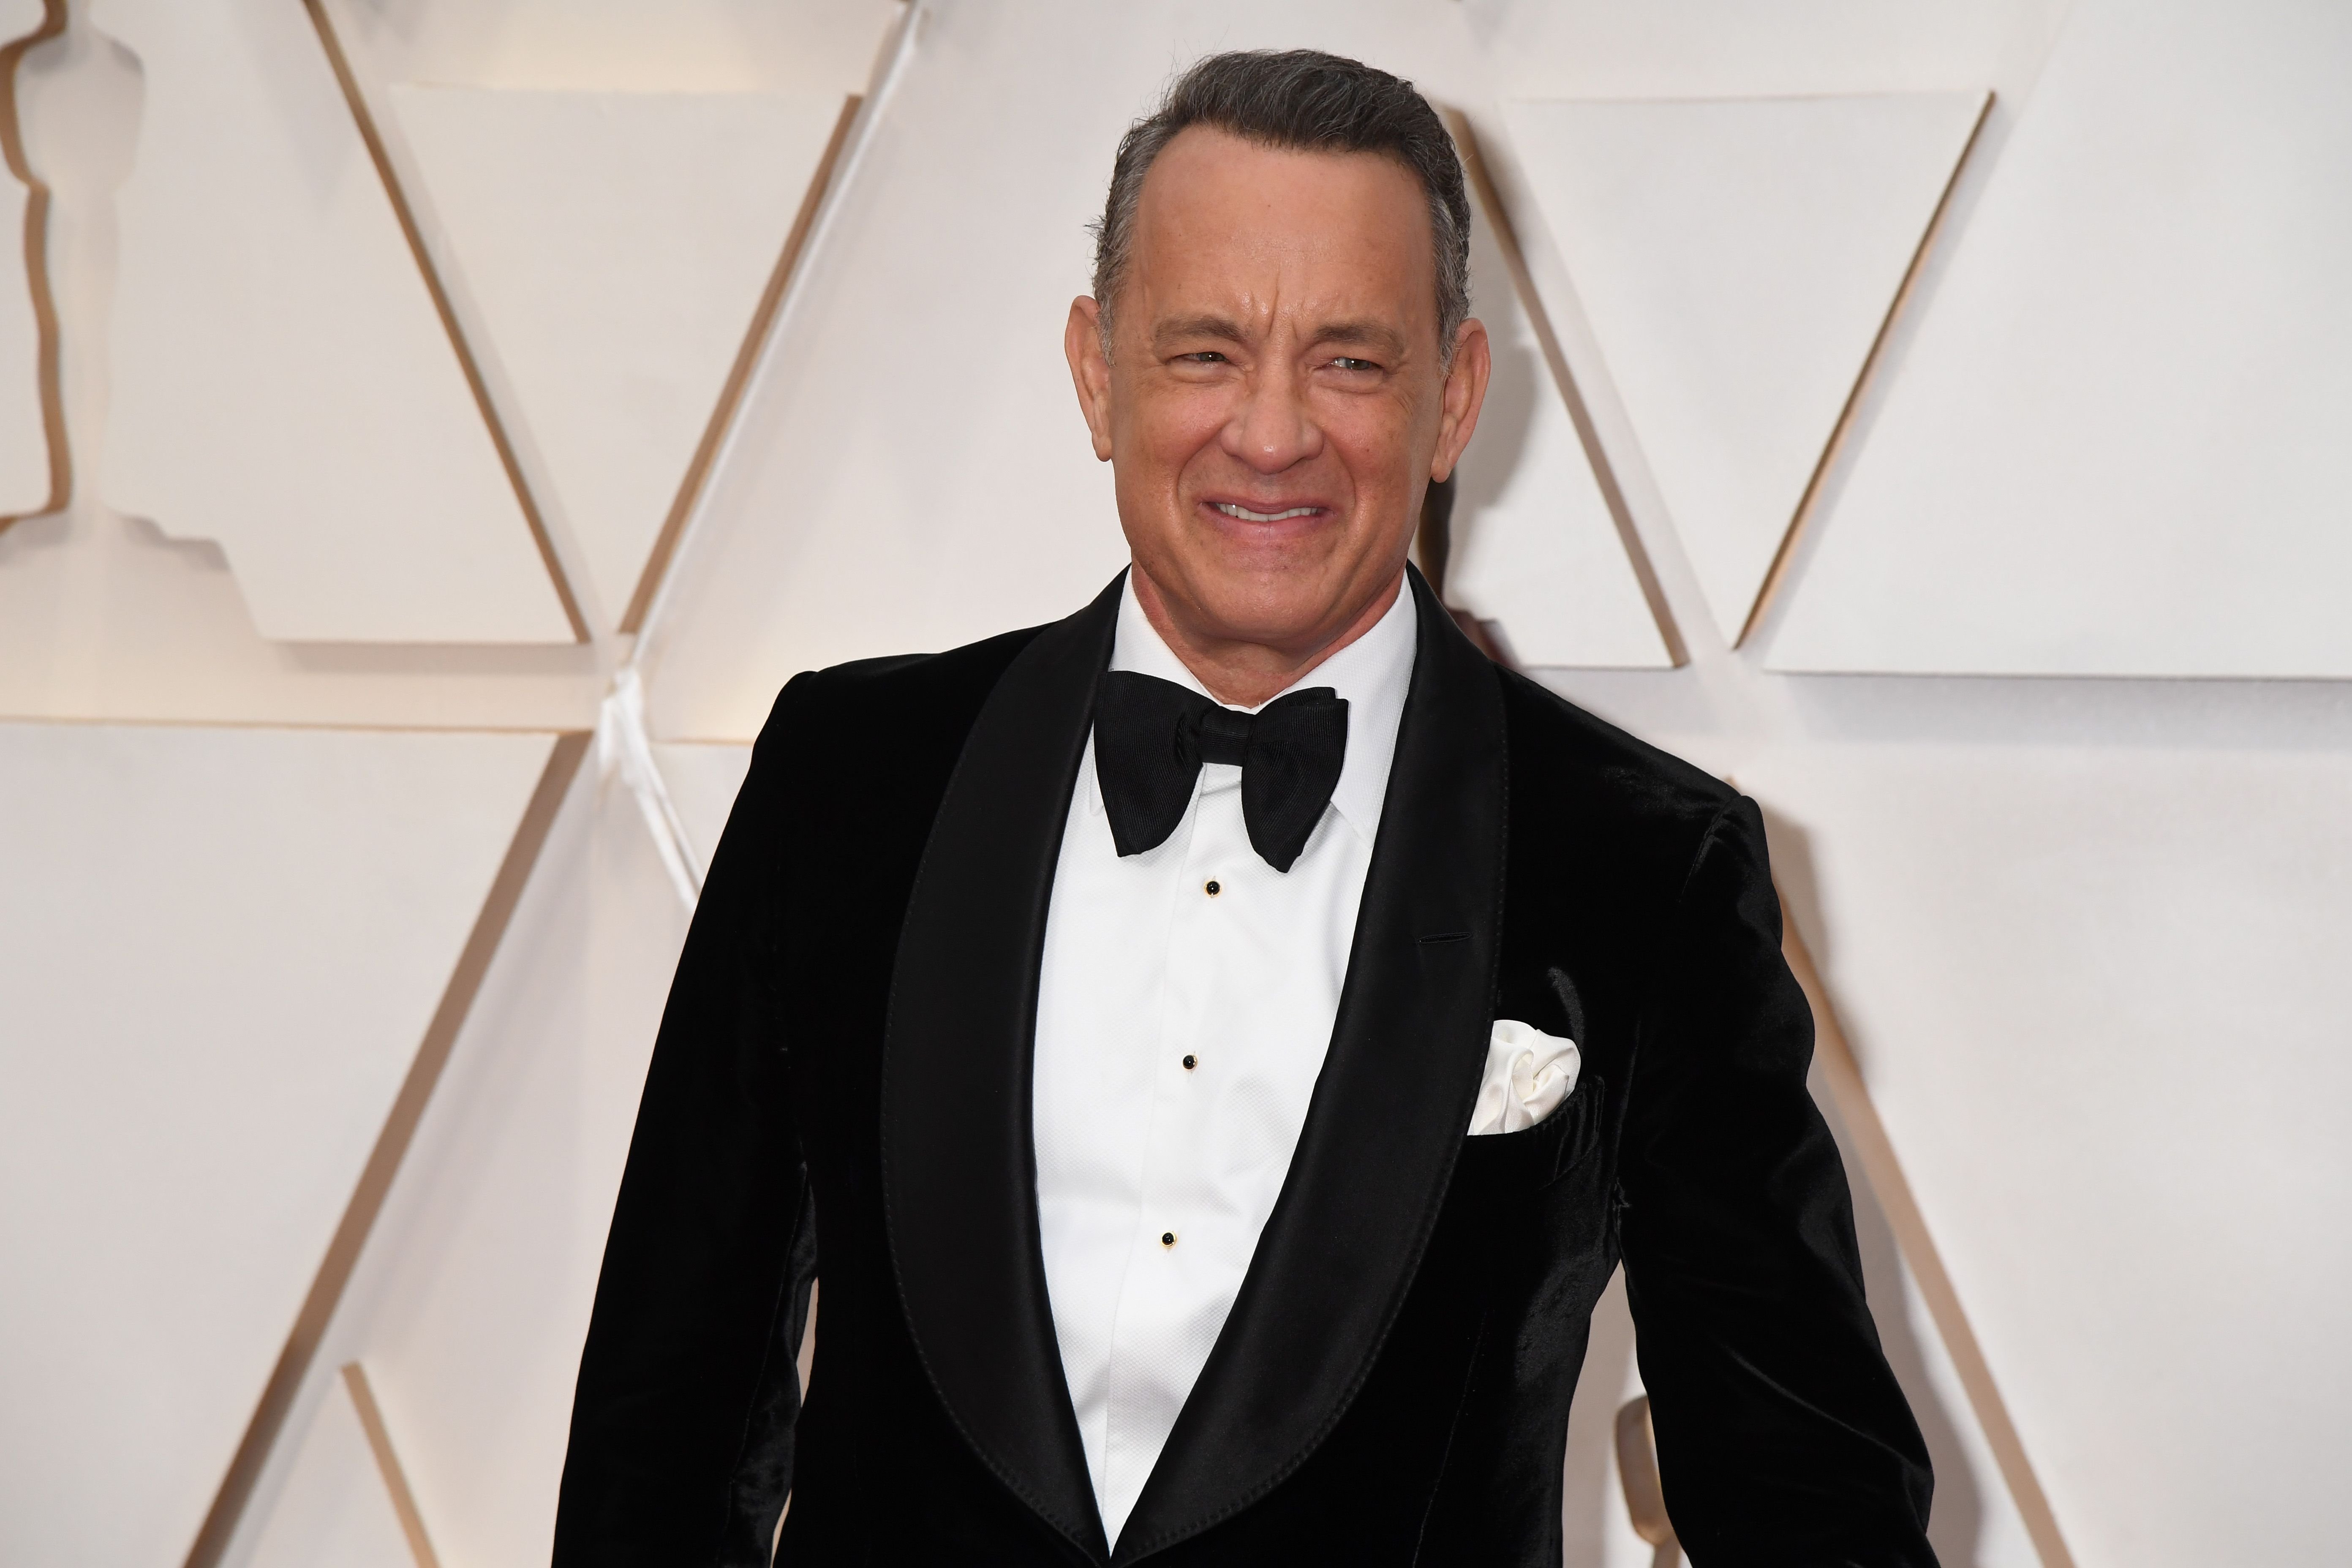 Tom Hanks at the 92nd Annual Academy Awards at Hollywood and Highland in Hollywood, California | Photo: Jeff Kravitz/FilmMagic